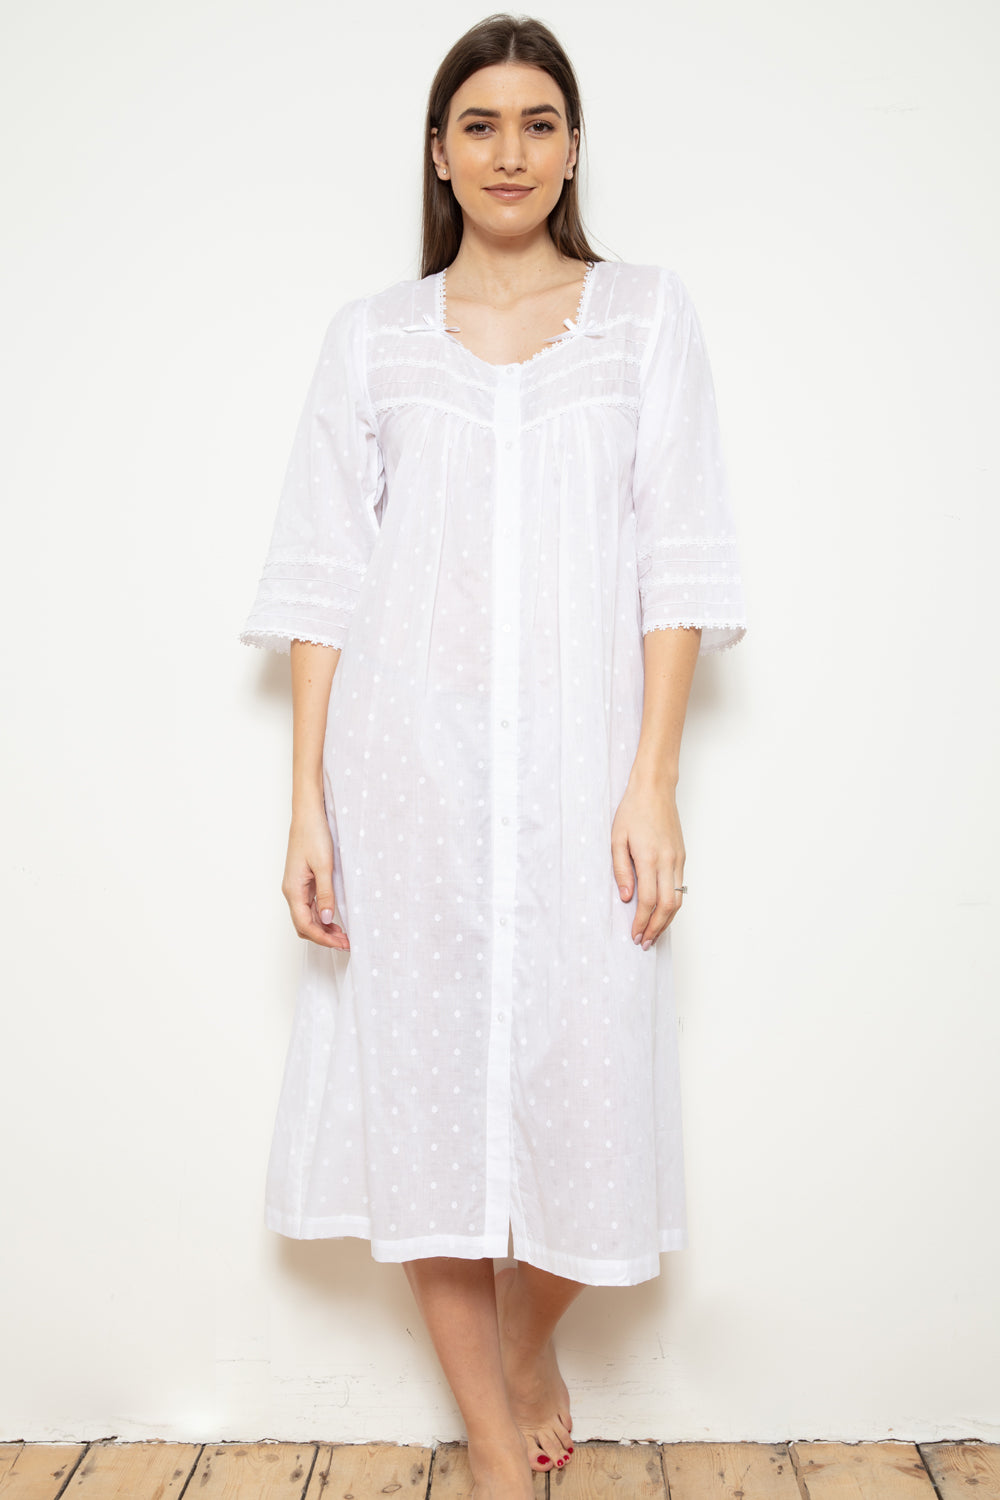 Cottonreal 'Jay' Cotton Voile Jacquard Polka Dot Button Front Nightdress